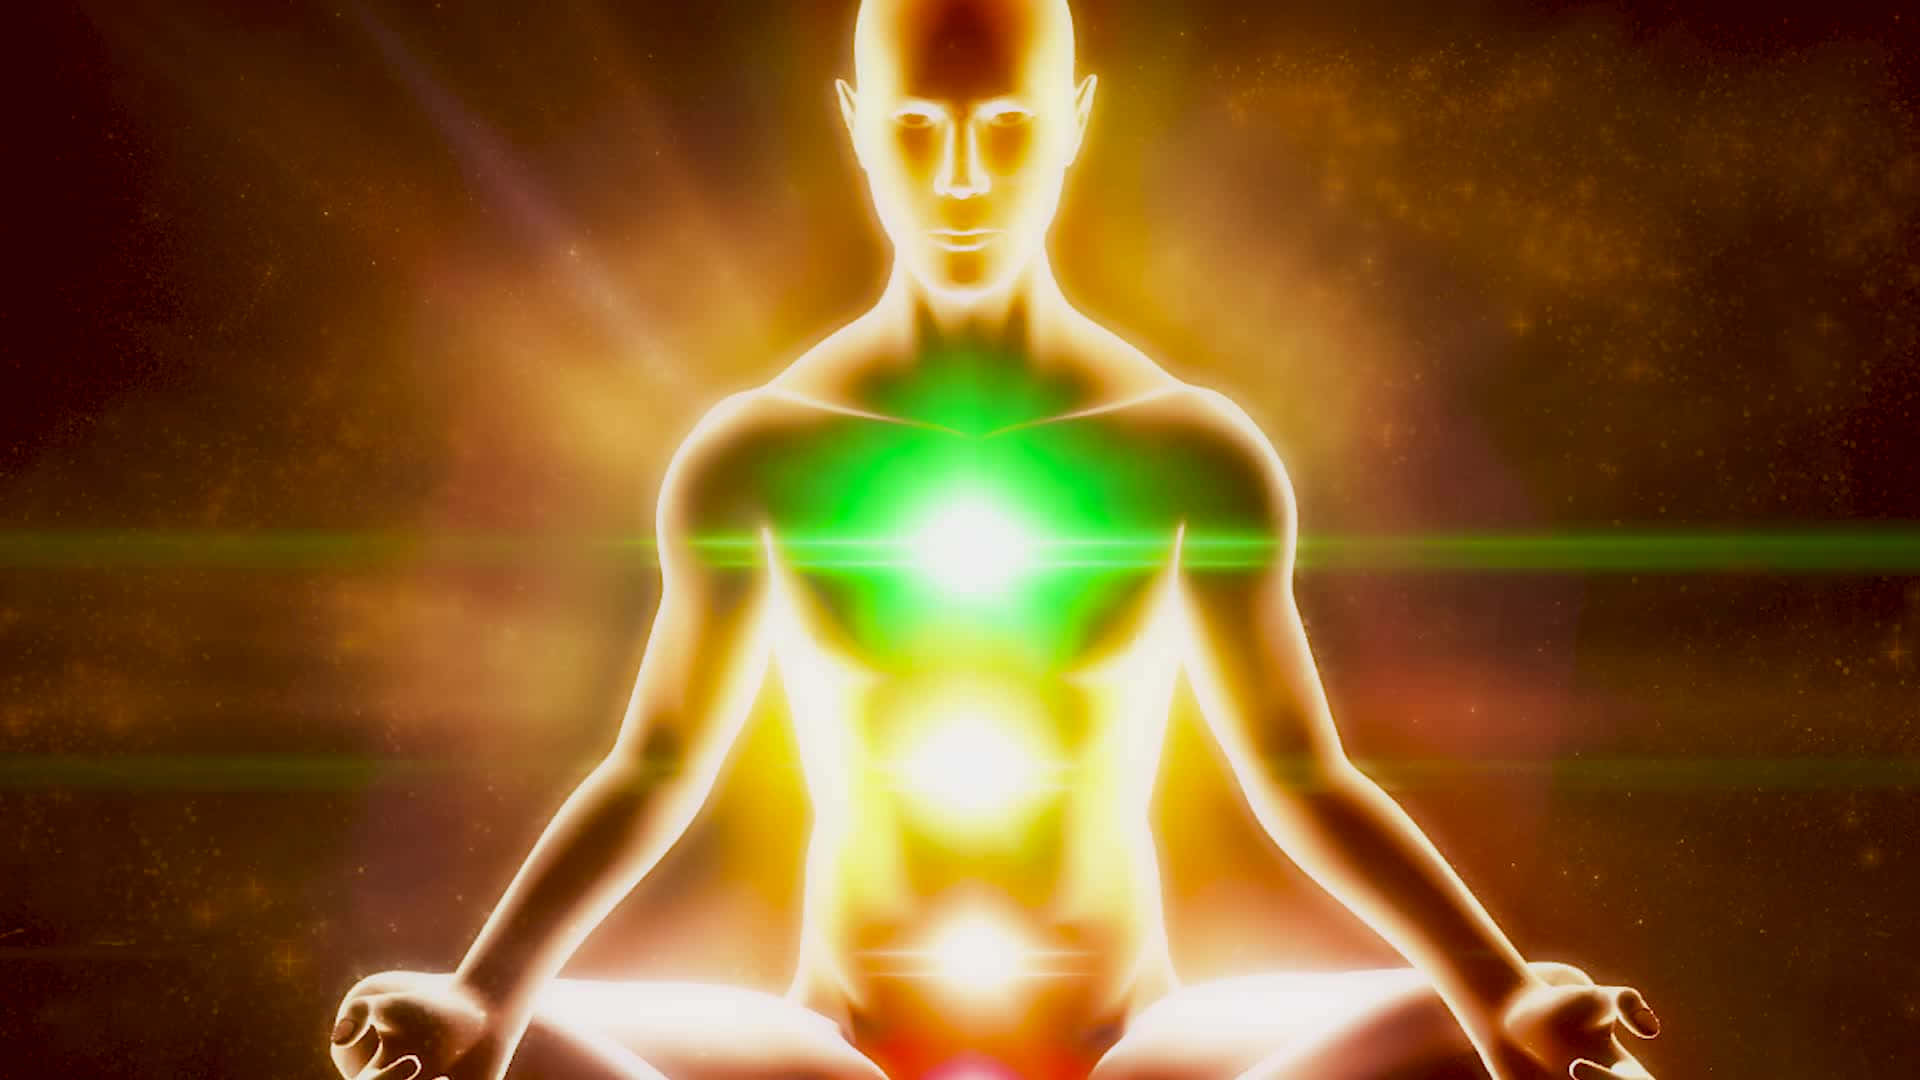 A Man In A Lotus Position With A Glowing Light Wallpaper